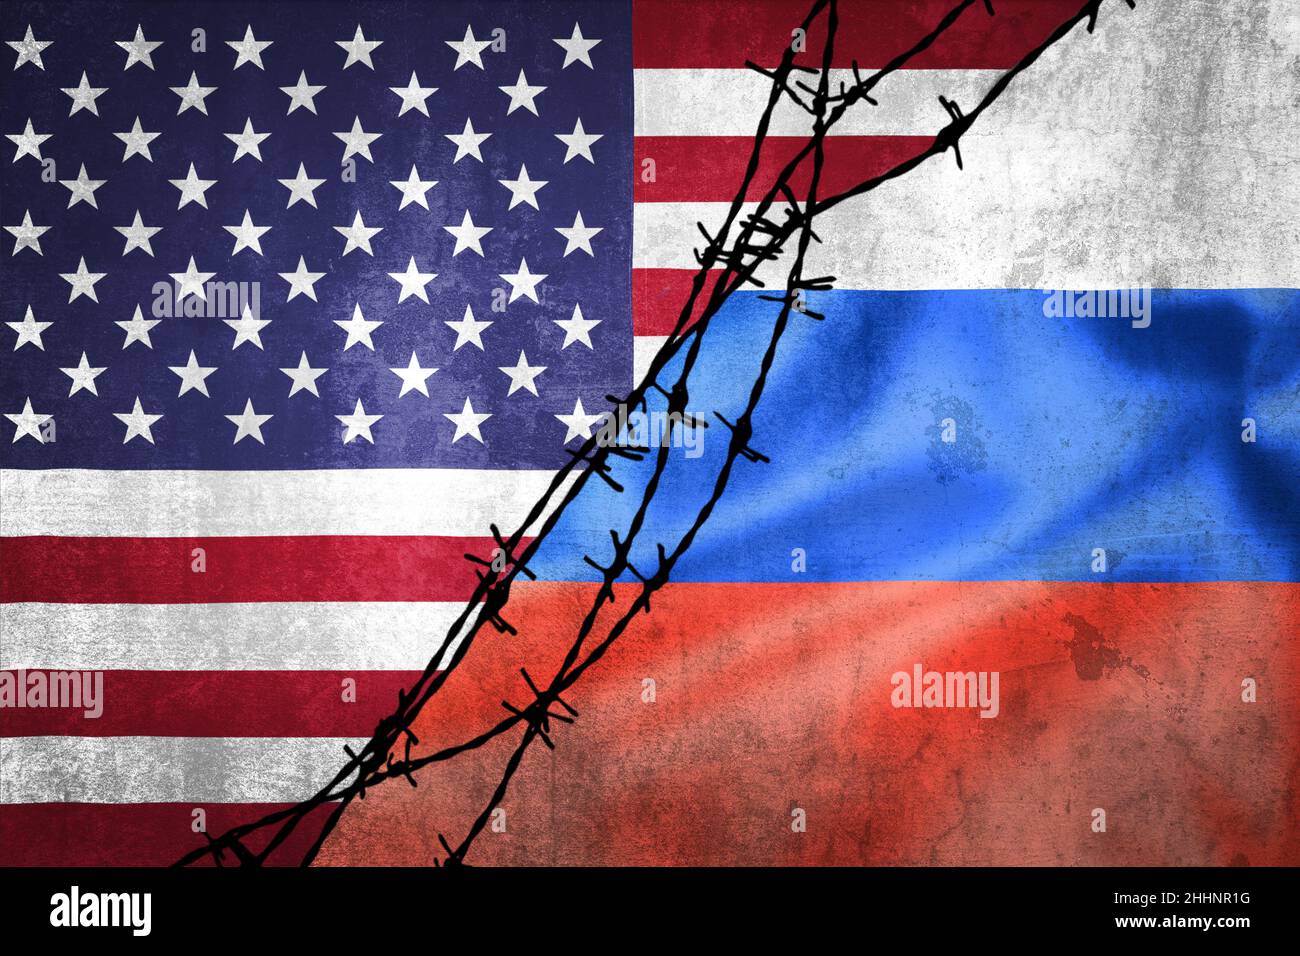 Grunge flags of Russian Federation and USA divided by barb wire illustration, concept of tense relations between west and Russia Stock Photo